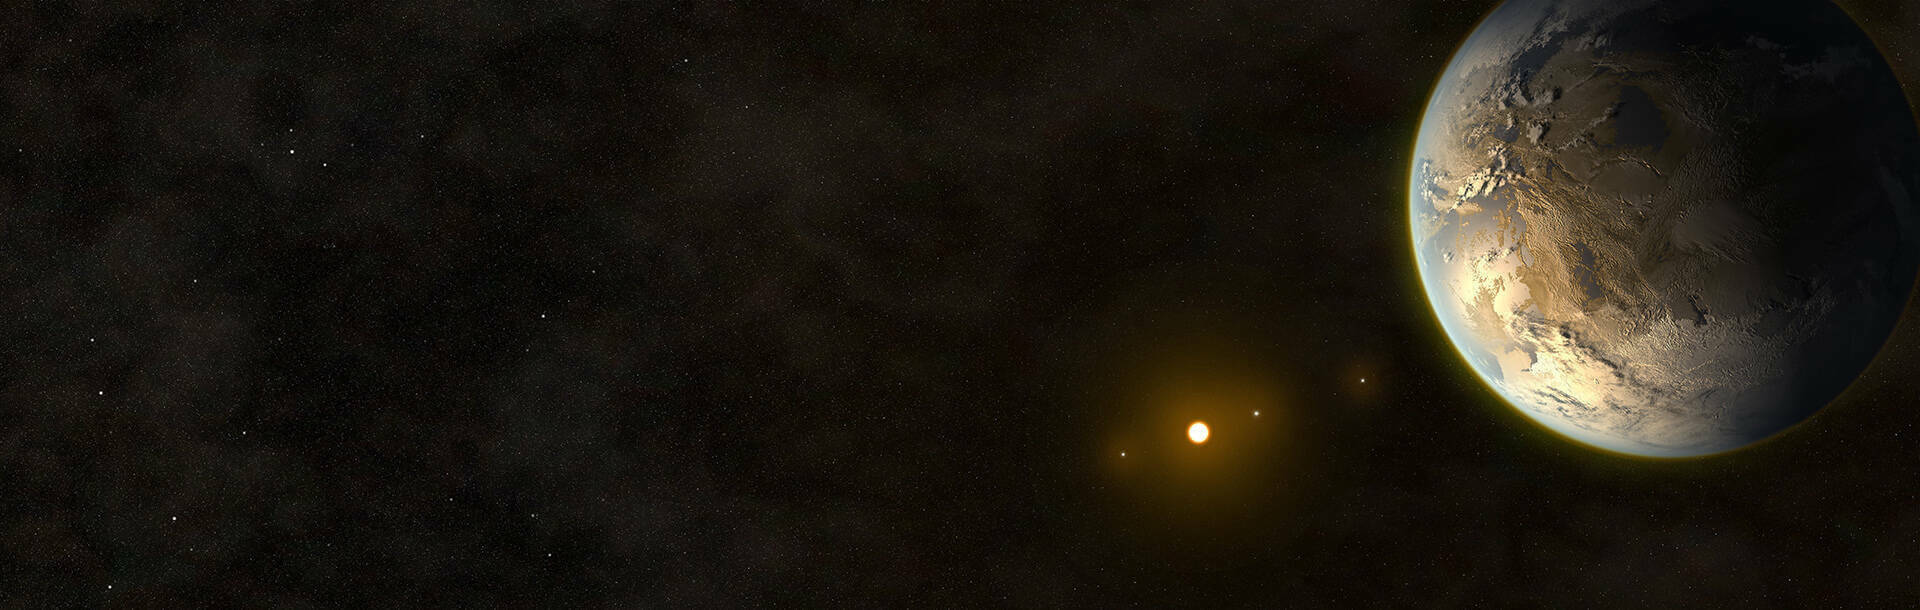 Artist rendering of an exoplanet system